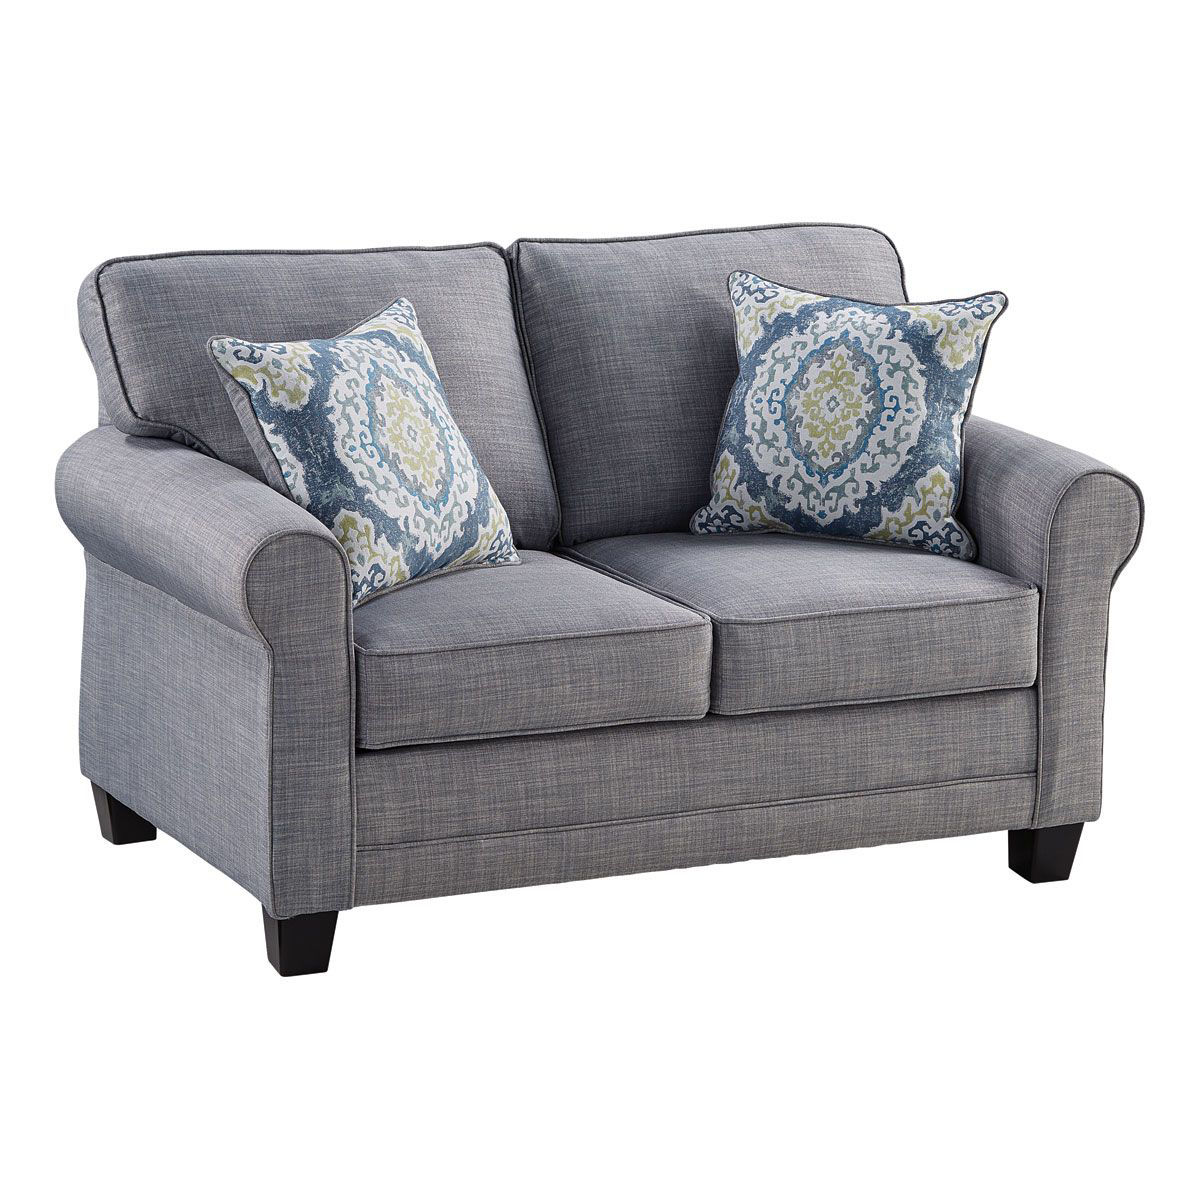 Loveseat &more Home Badcock Hayes Furniture |